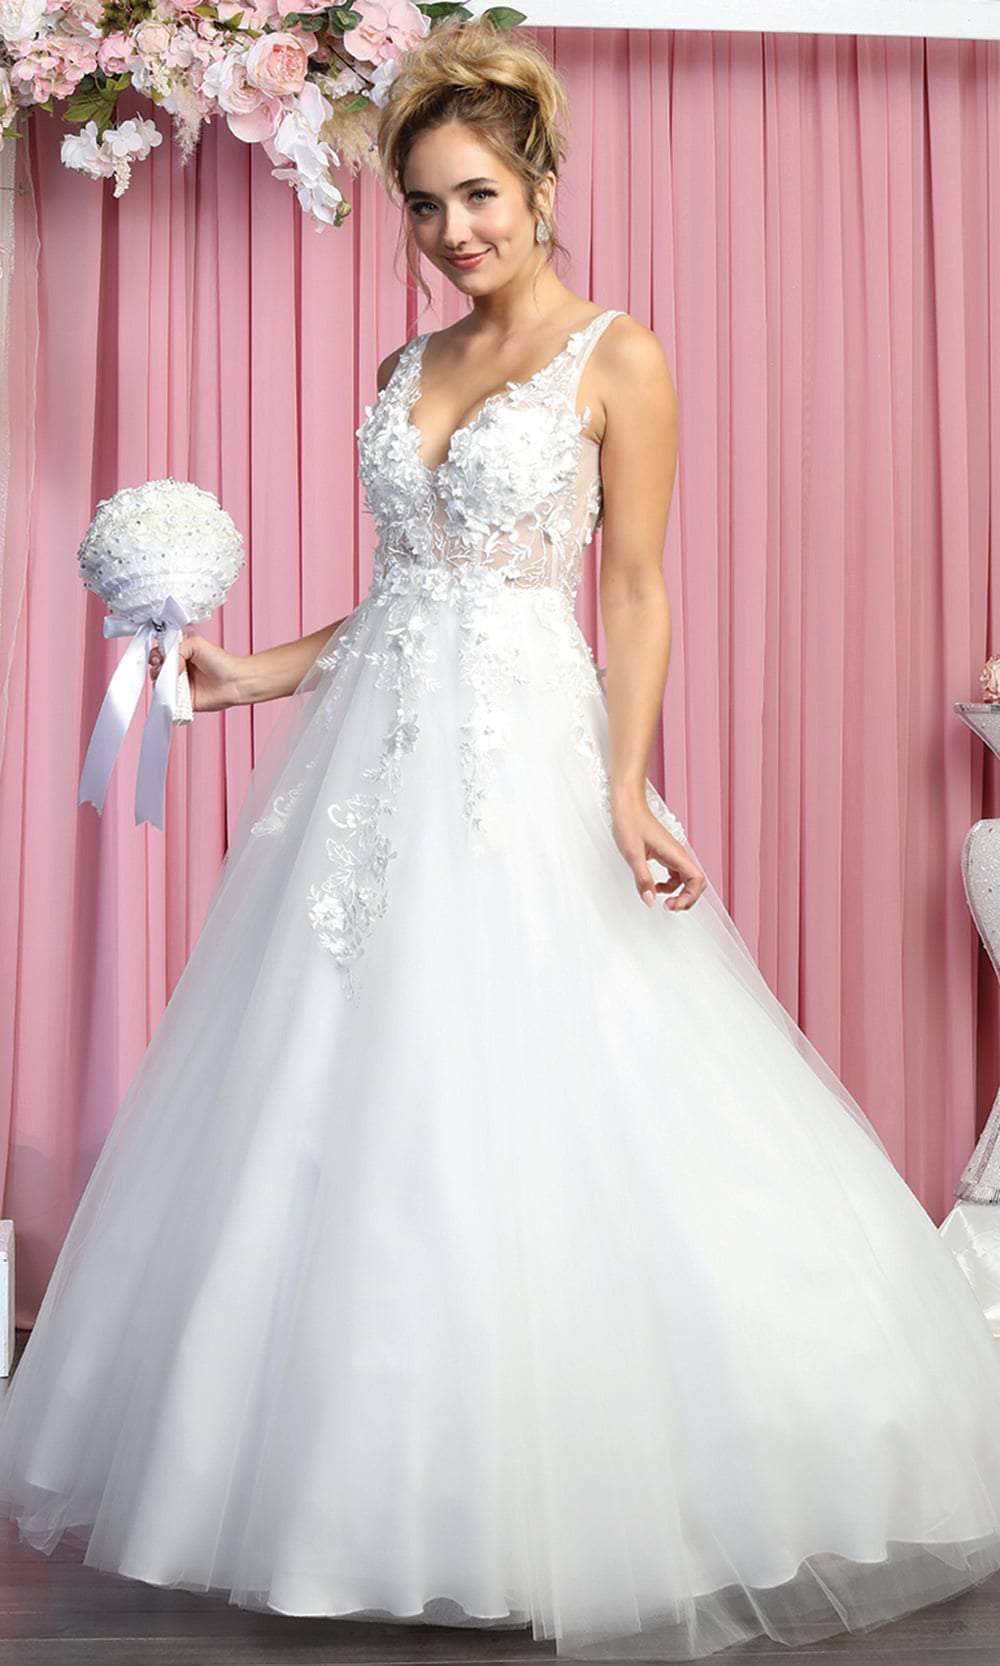 May Queen RQ7902 - Sleeveless Plunging V-Neckline Wedding Gown
